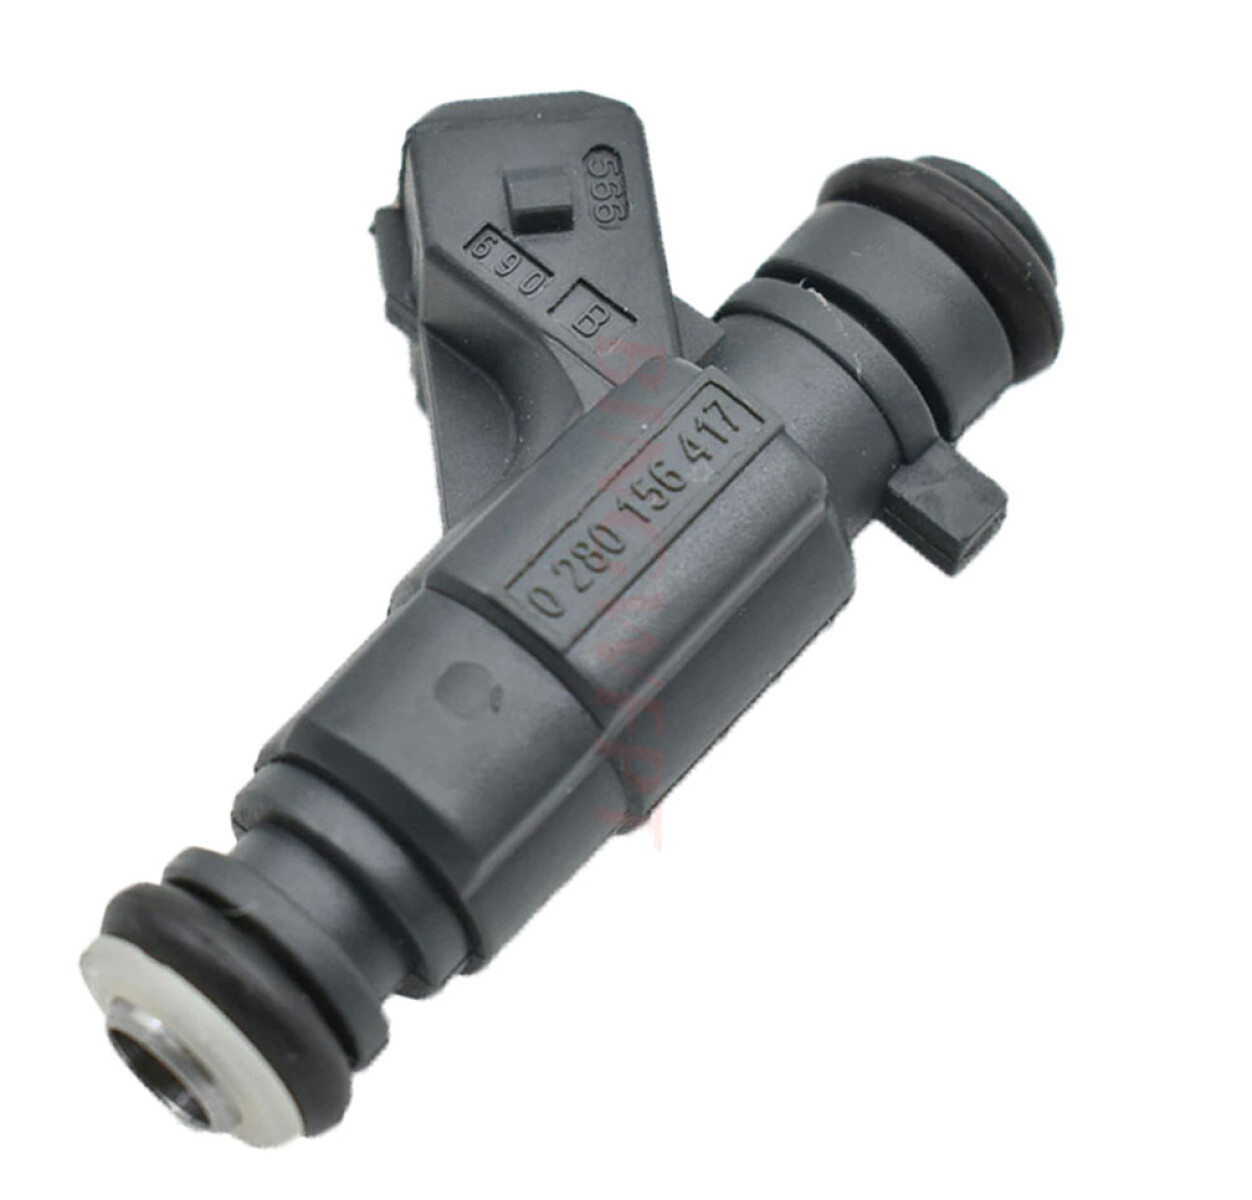 INYECTOR - N5 1.0 3 CIL. TIPO BOSCH 4 AGUJEROS - 